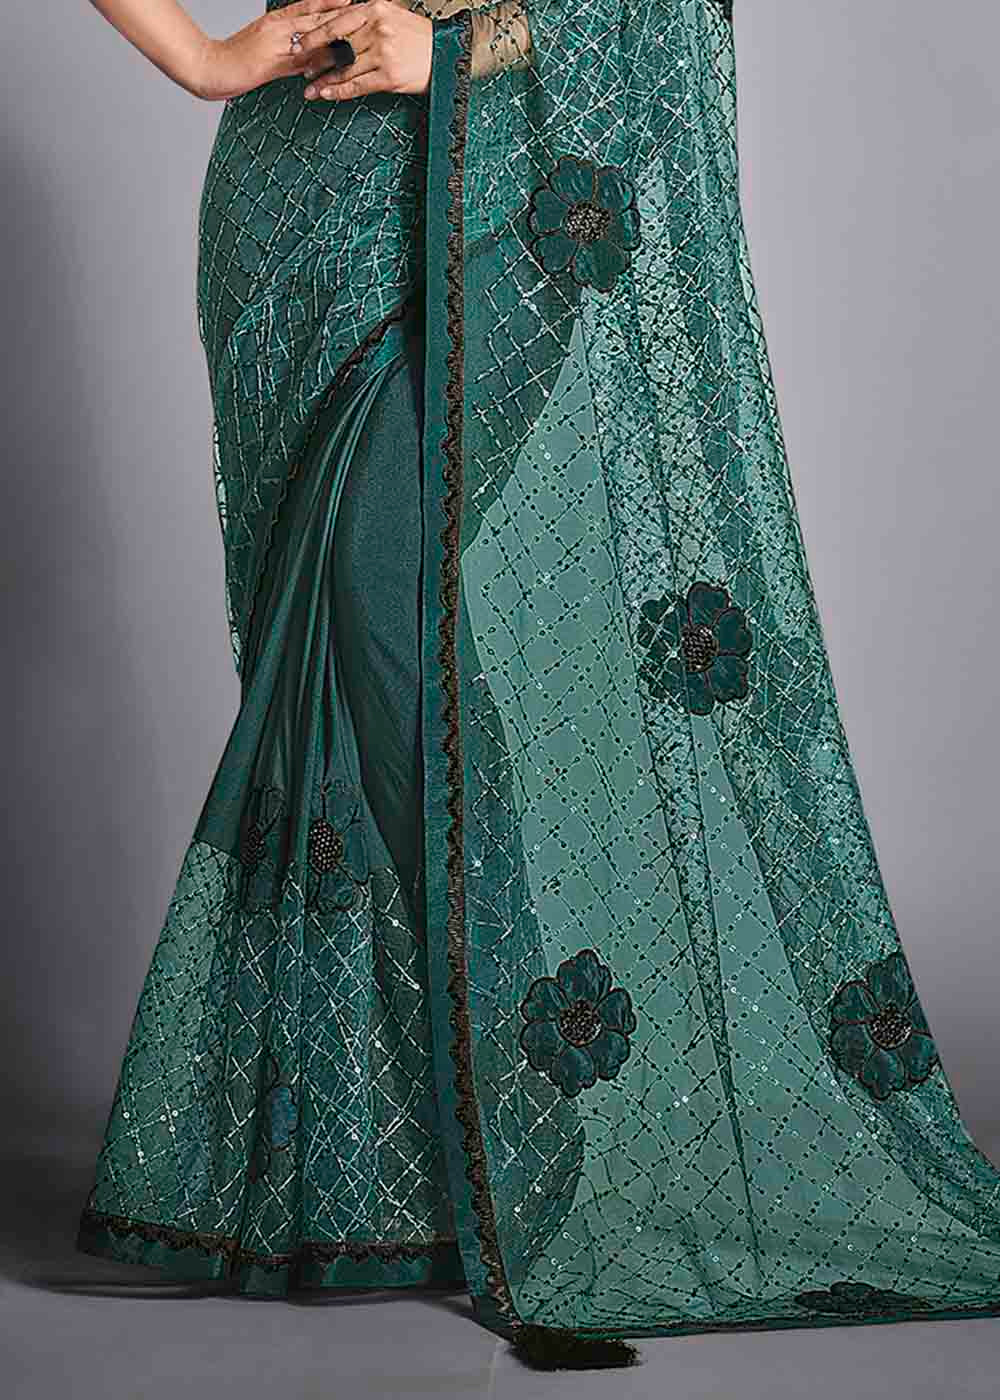 Teal Green Designer Lycra Saree with Sequins Embroidery & Applique work